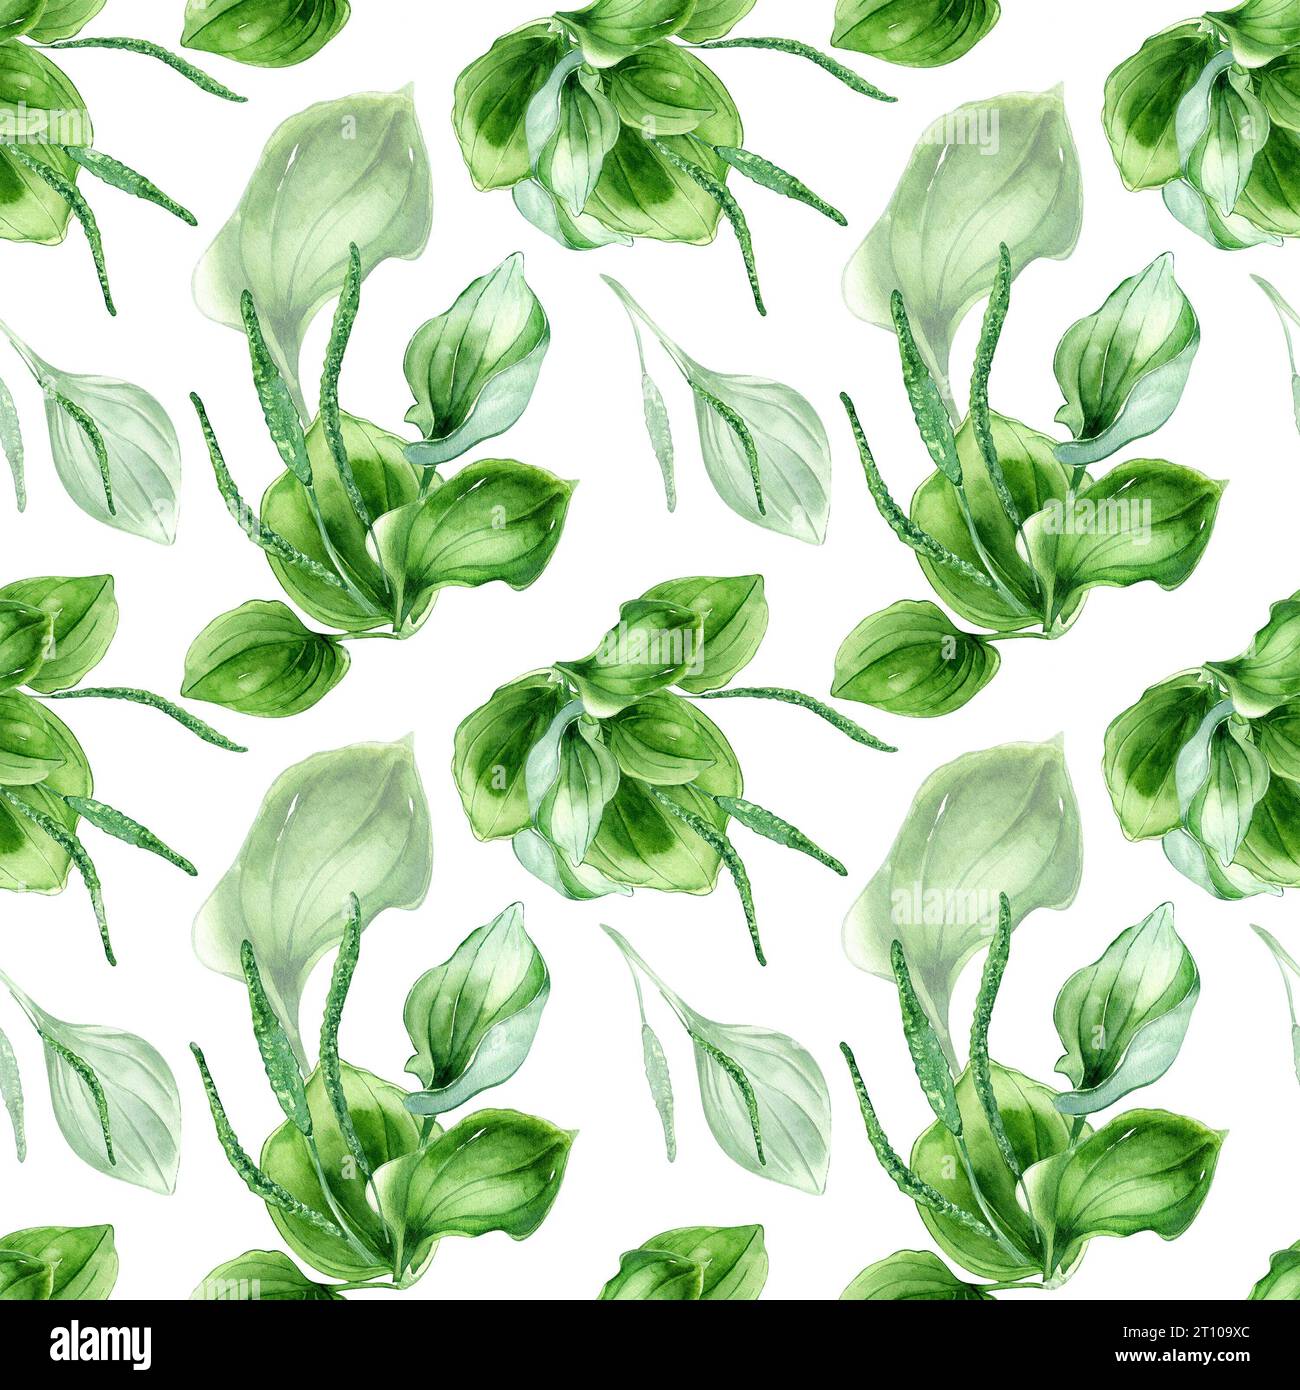 Plantago broadleaf medicinal plant watercolor seamless pattern isolated on white background. Plantain, green leaves, herb, psyllium hand drawn. Design Stock Photo